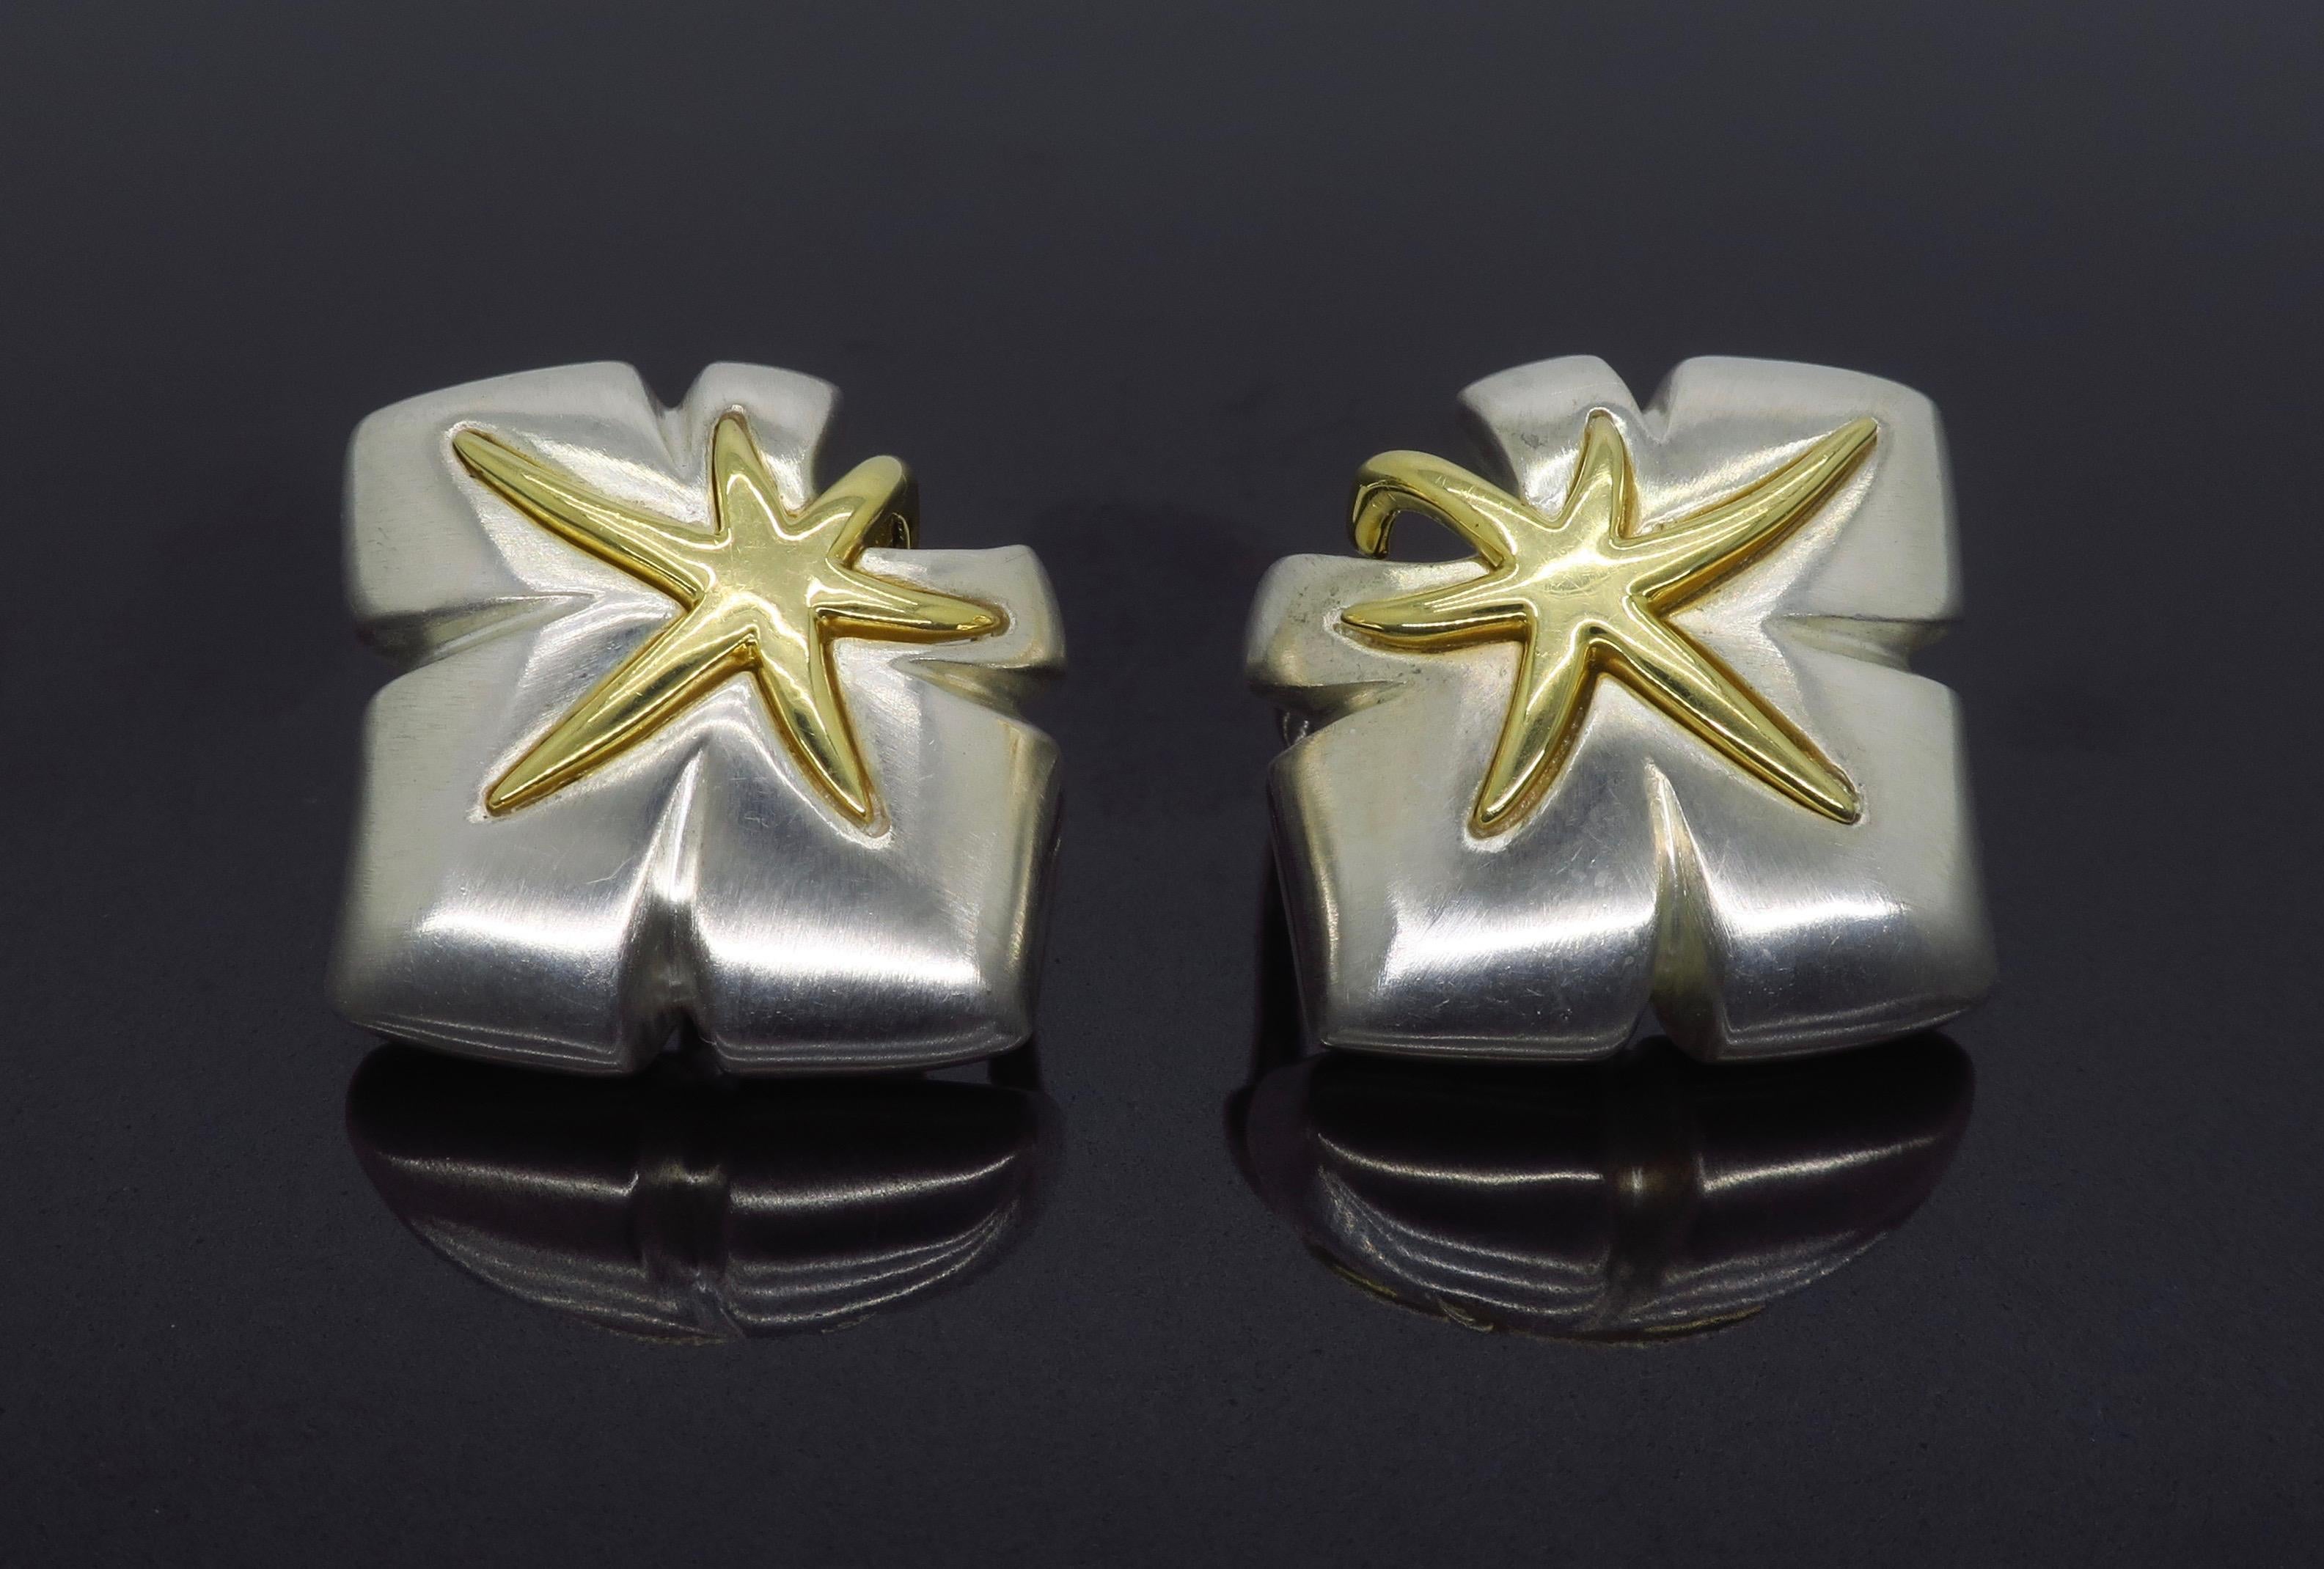 Vintage Ivy Starfish earrings crafted by Tiffany & Co. in sterling silver and 18k yellow gold

Designer: Tiffany & Co.
Metal: Sterling Silver & 18K Yellow Gold
Earring Length: Approximately .75” Long
Marked/Tested: Stamped “750” “1991 TIFFANY & CO.